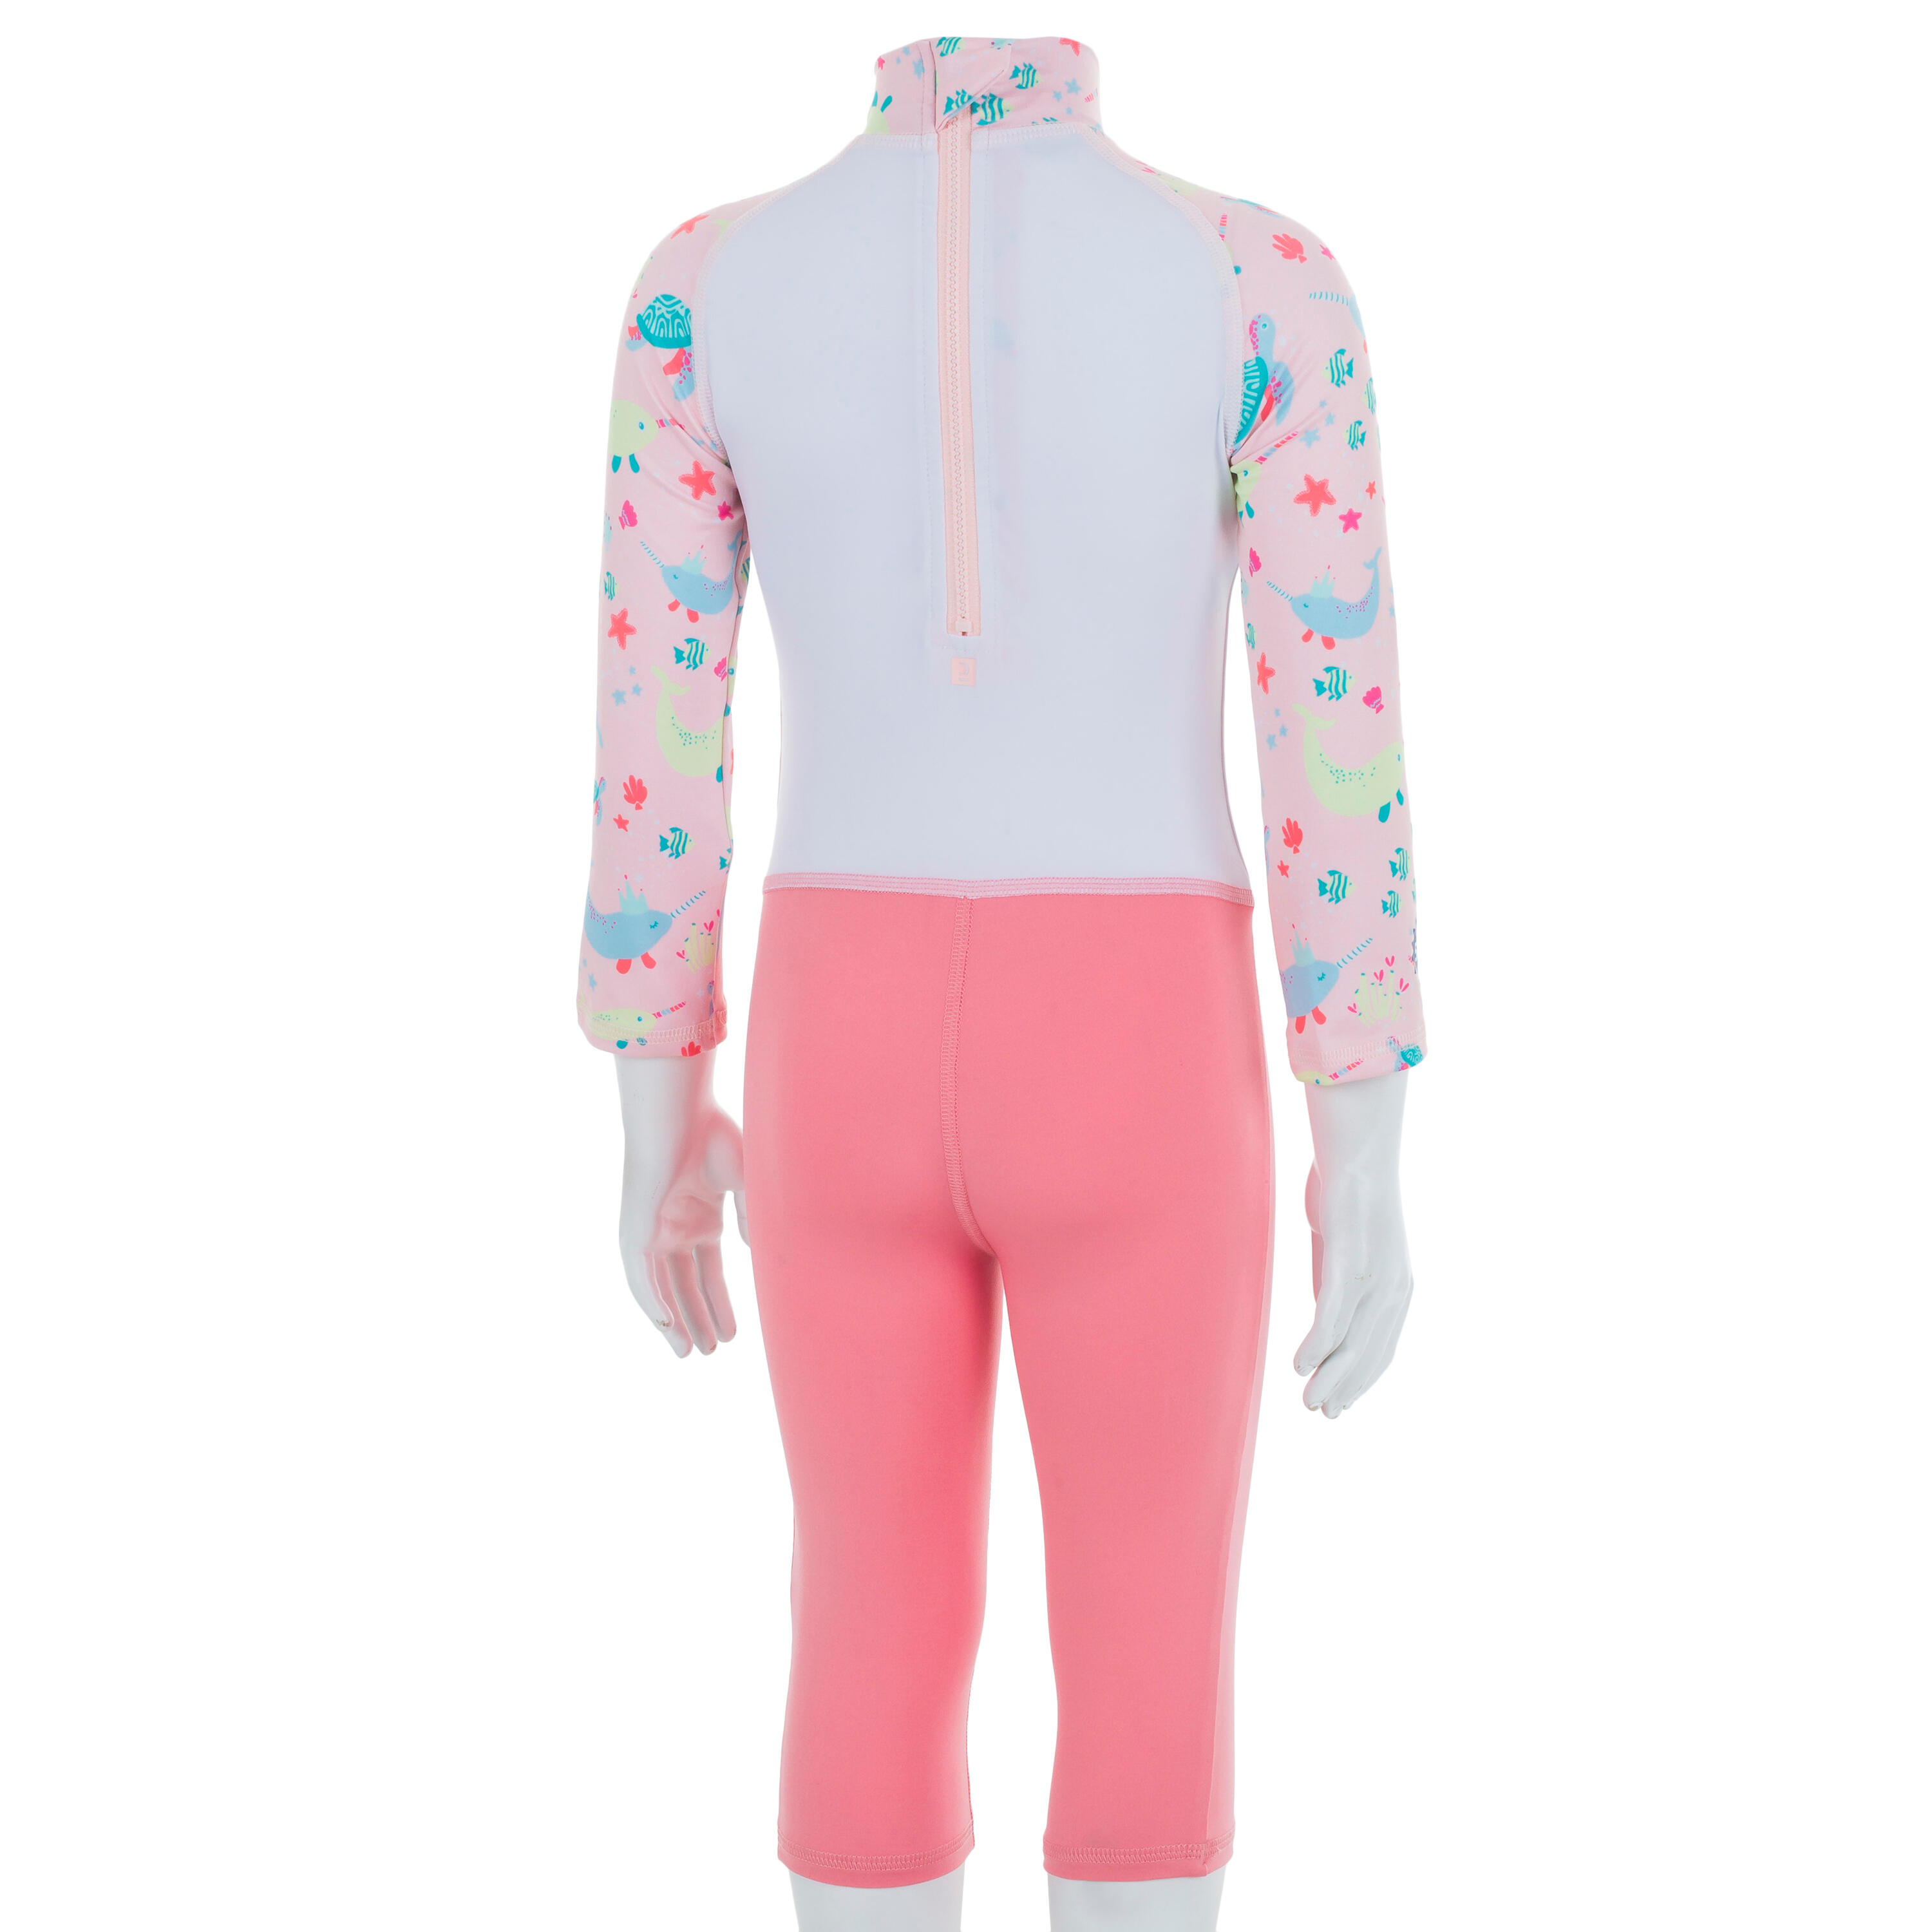 Baby / Kids' Swimming Long Sleeve UV-Protection Suit - Pink Print 4/8